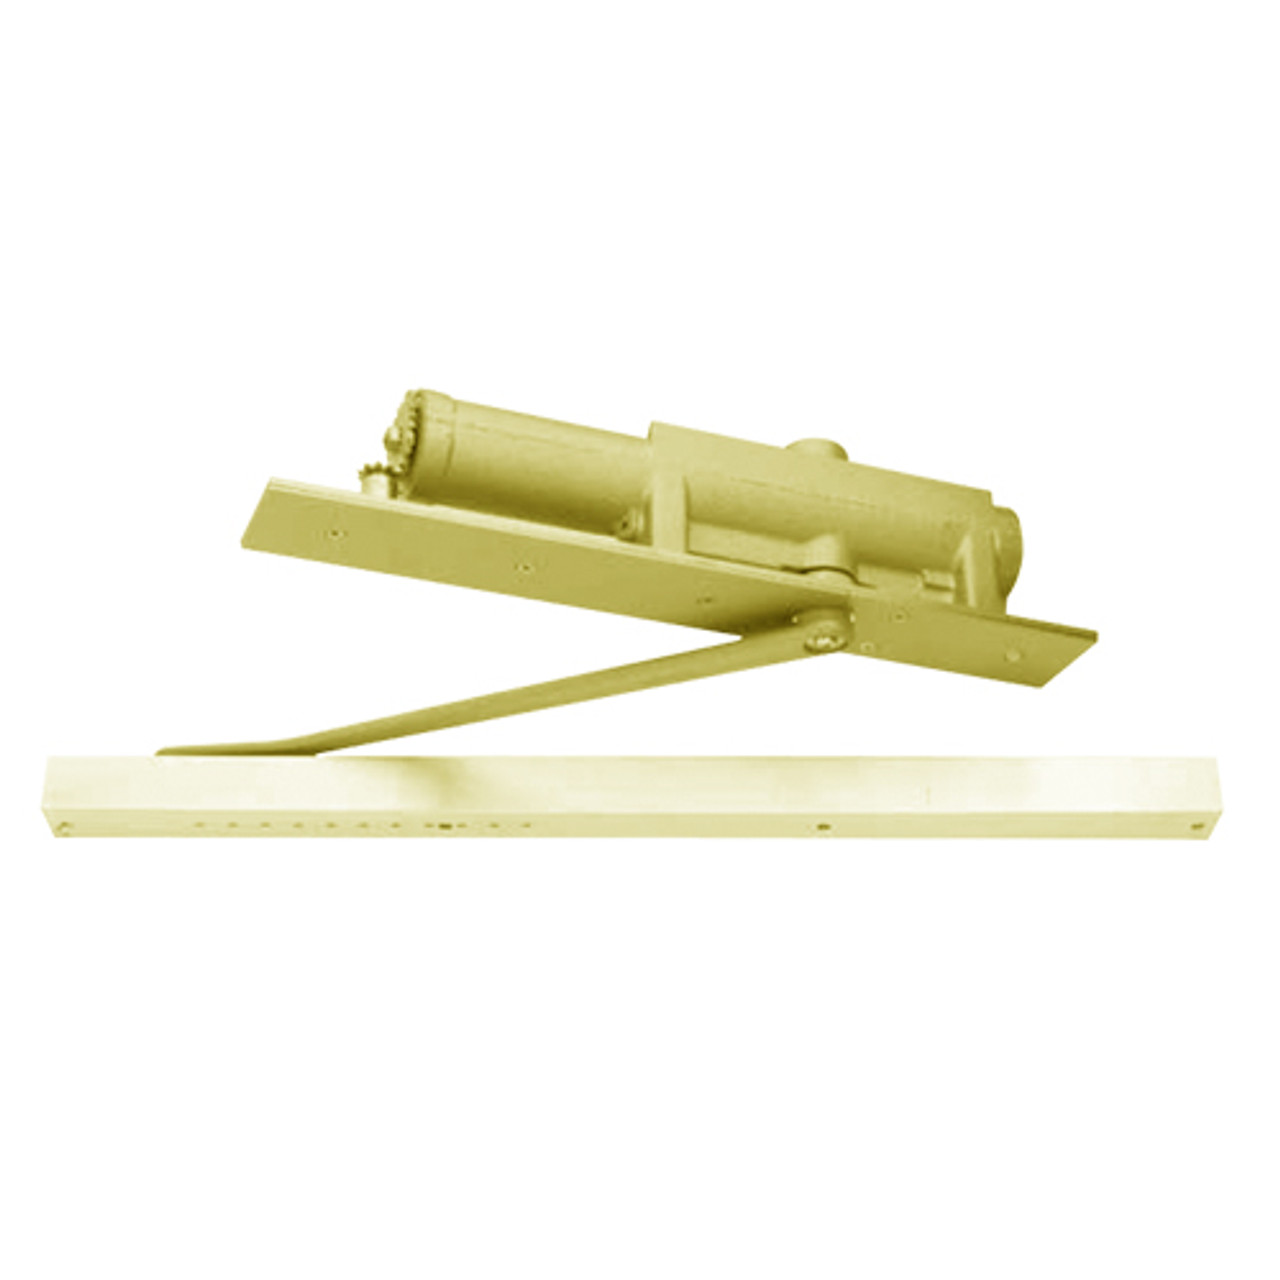 269-CSP-EAB-LH Sargent 269 Series Complete Closer Security Package Concealed Door Closer with Track Arm in Brass Powder Coat